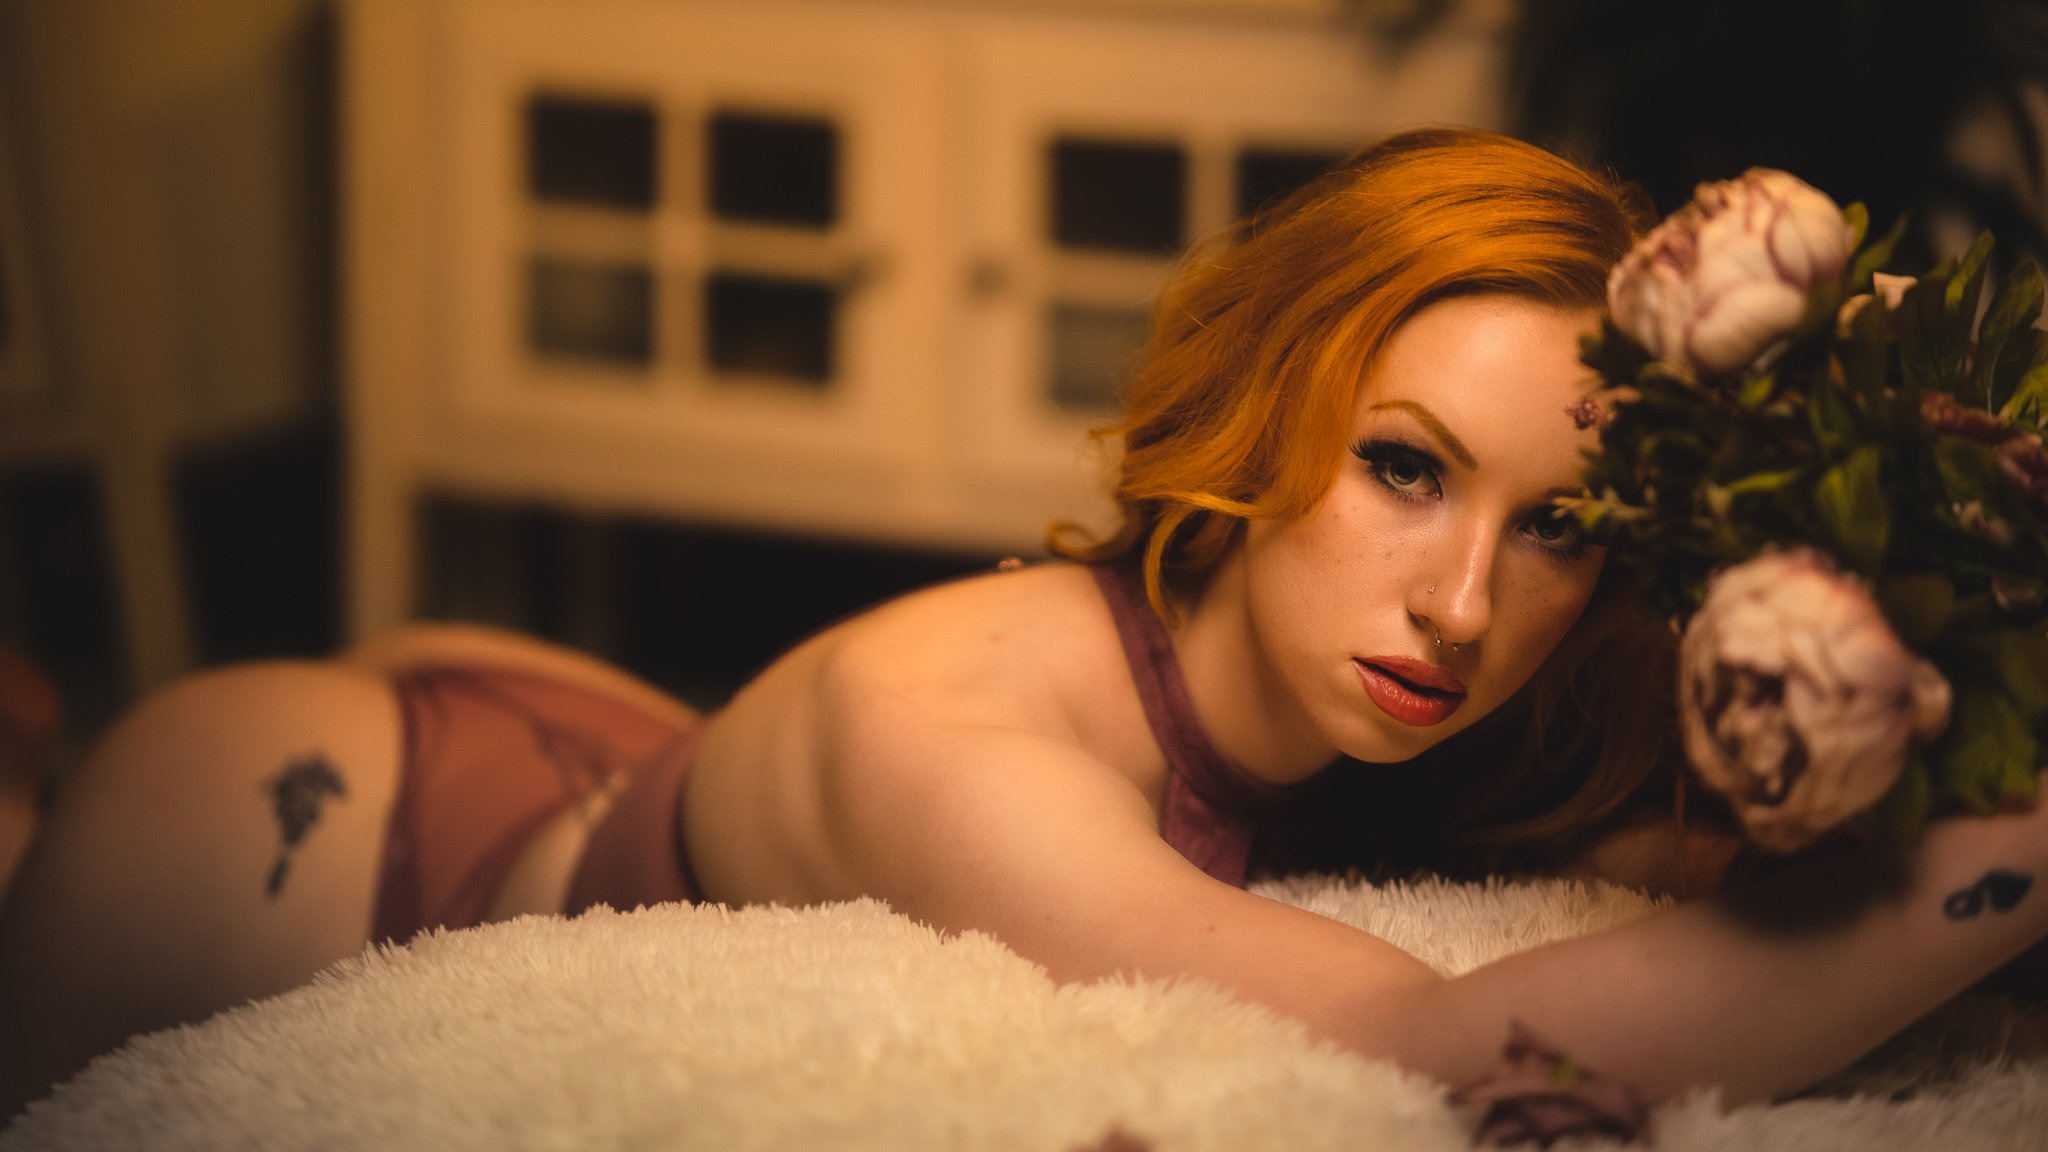 a sexy boudoir photo of redheaded model leaning on a bed with flowers by photographer yohance bailey based in binghamton new york  serving ithaca syracuse upstate new york.jpg